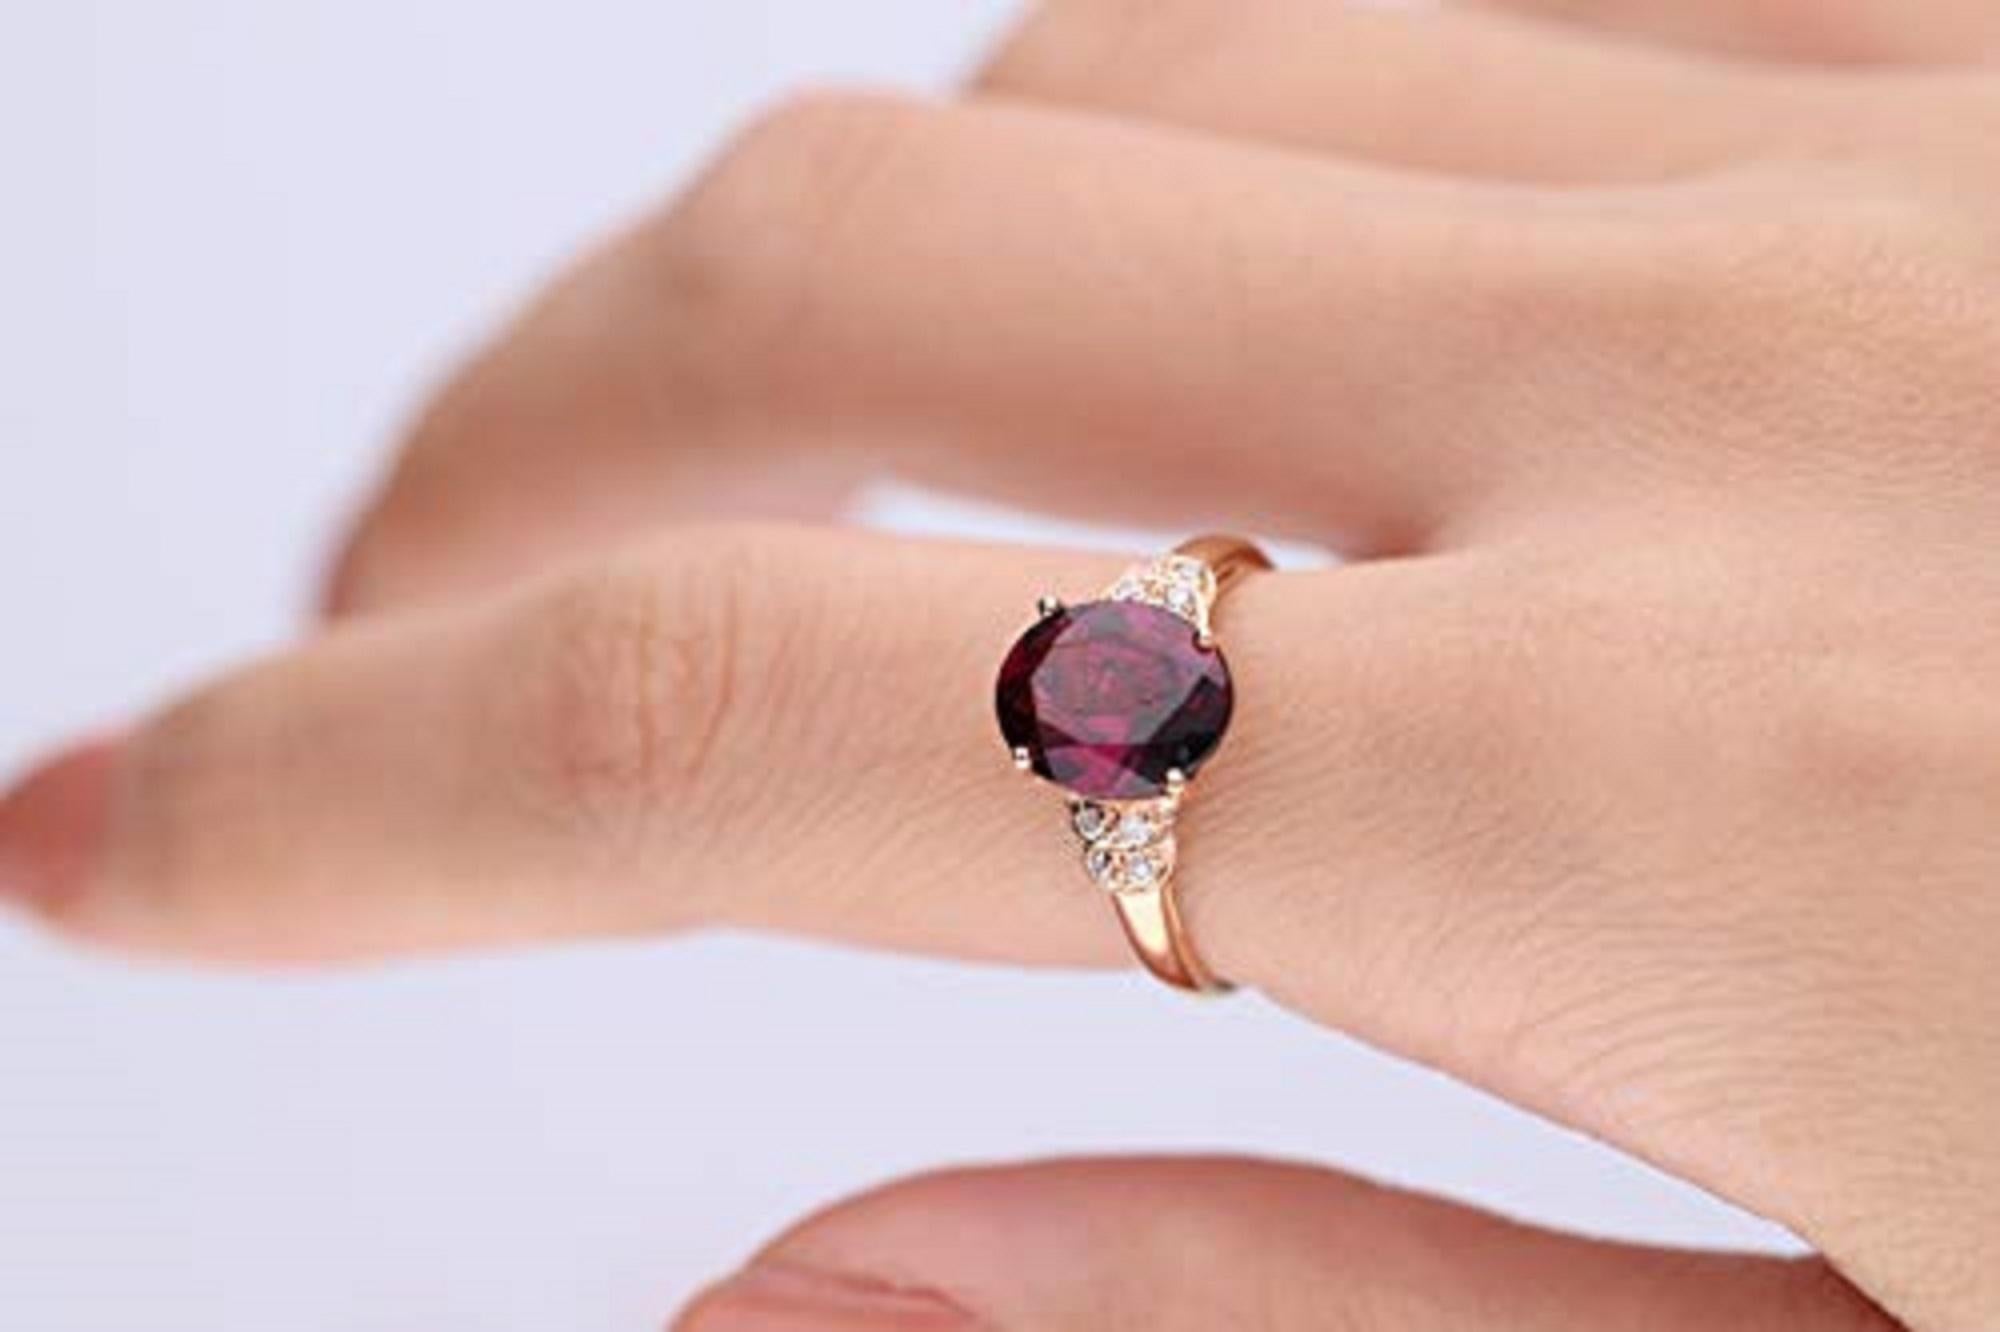 A gorgeous oval-cut Raspberry color Natural Rodholite Garnet gemstone centers this remarkable Gin & Grace ring and accented with round-cut diamonds on its sides. Crafted of beautiful 10 karat rose gold, this ring shines with a highly polished